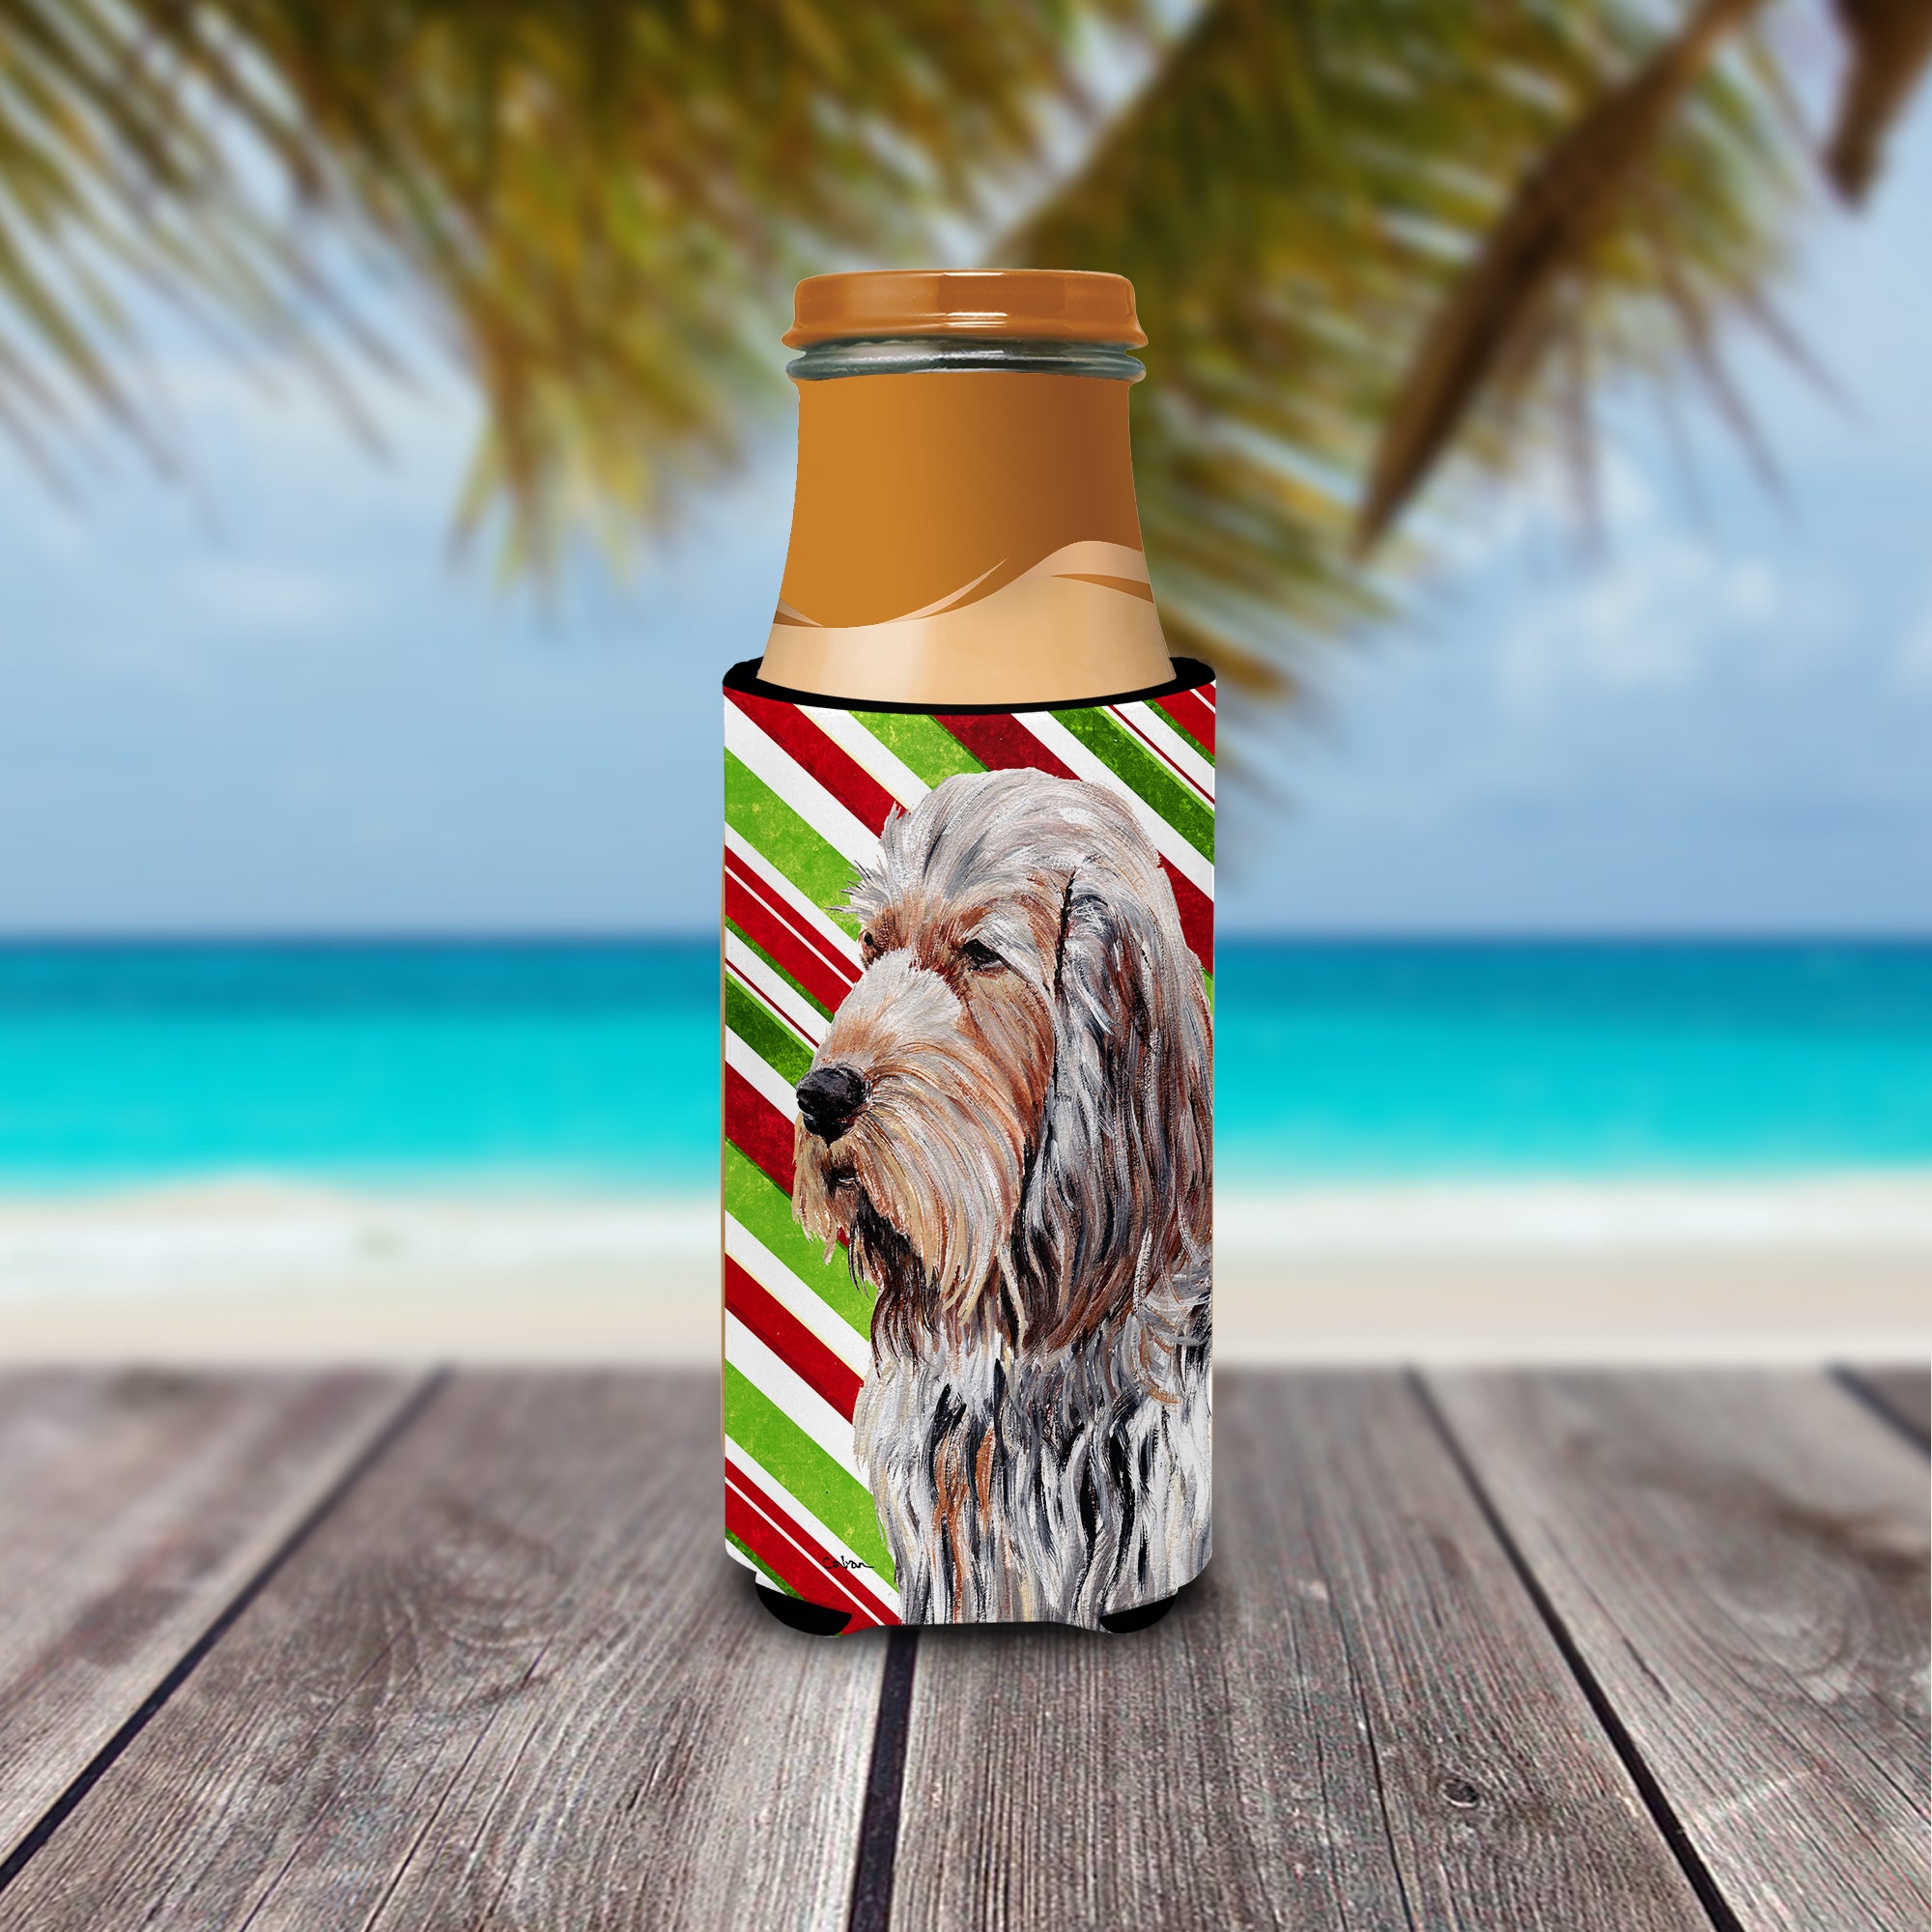 Otterhound Candy Cane Christmas Ultra Beverage Insulators for slim cans SC9804MUK